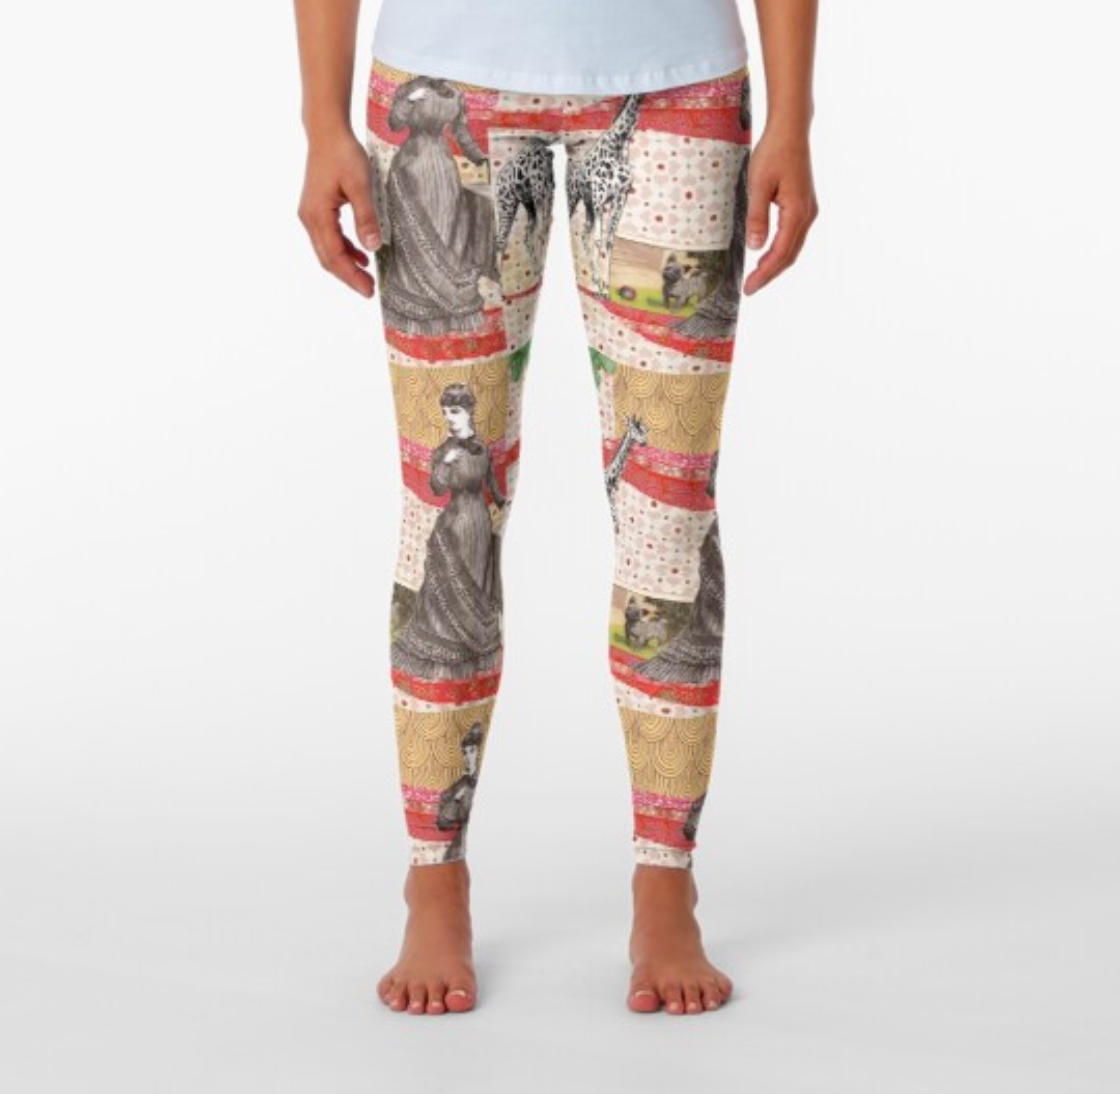 Designer Leggings _ Oh look Toby! There’s a Giraffe